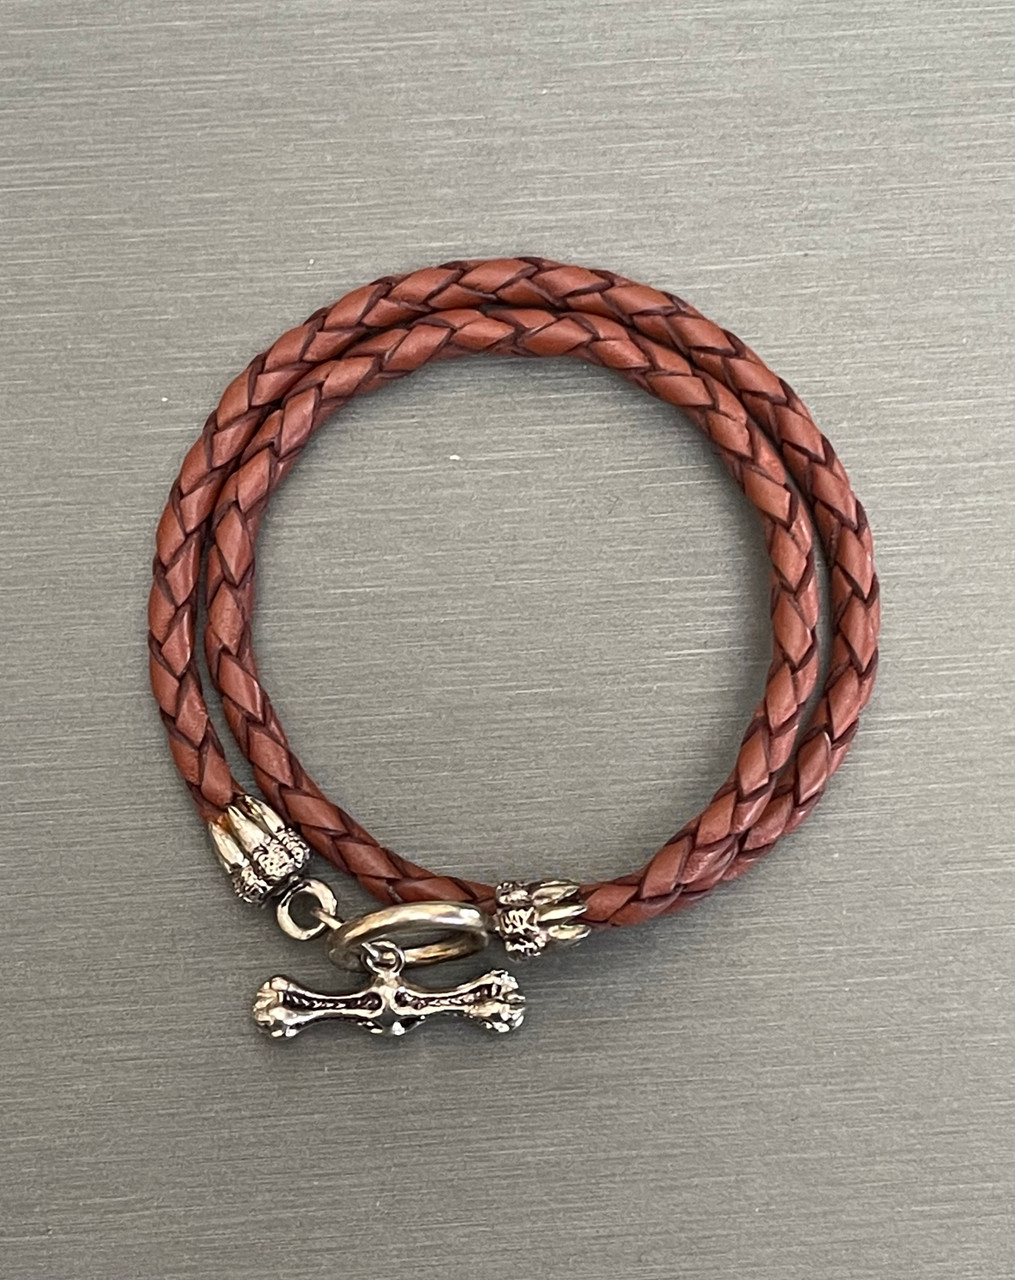 Double Leather Bracelet with Silver Toggle Clasp - Julie Miro´